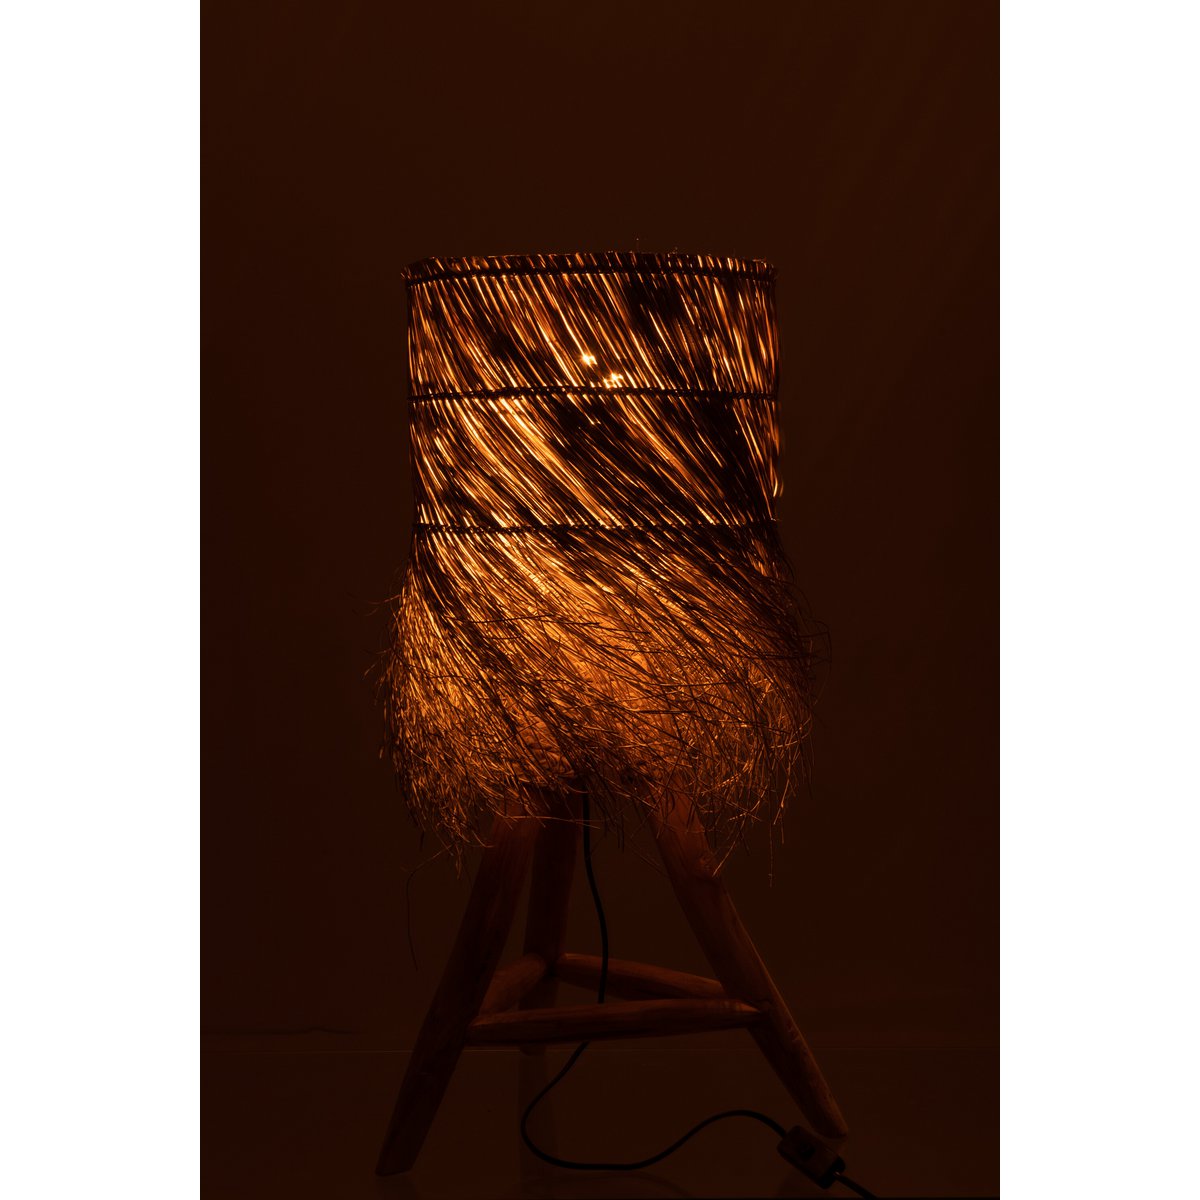 Rafi table lamp made of grass and teak, natural